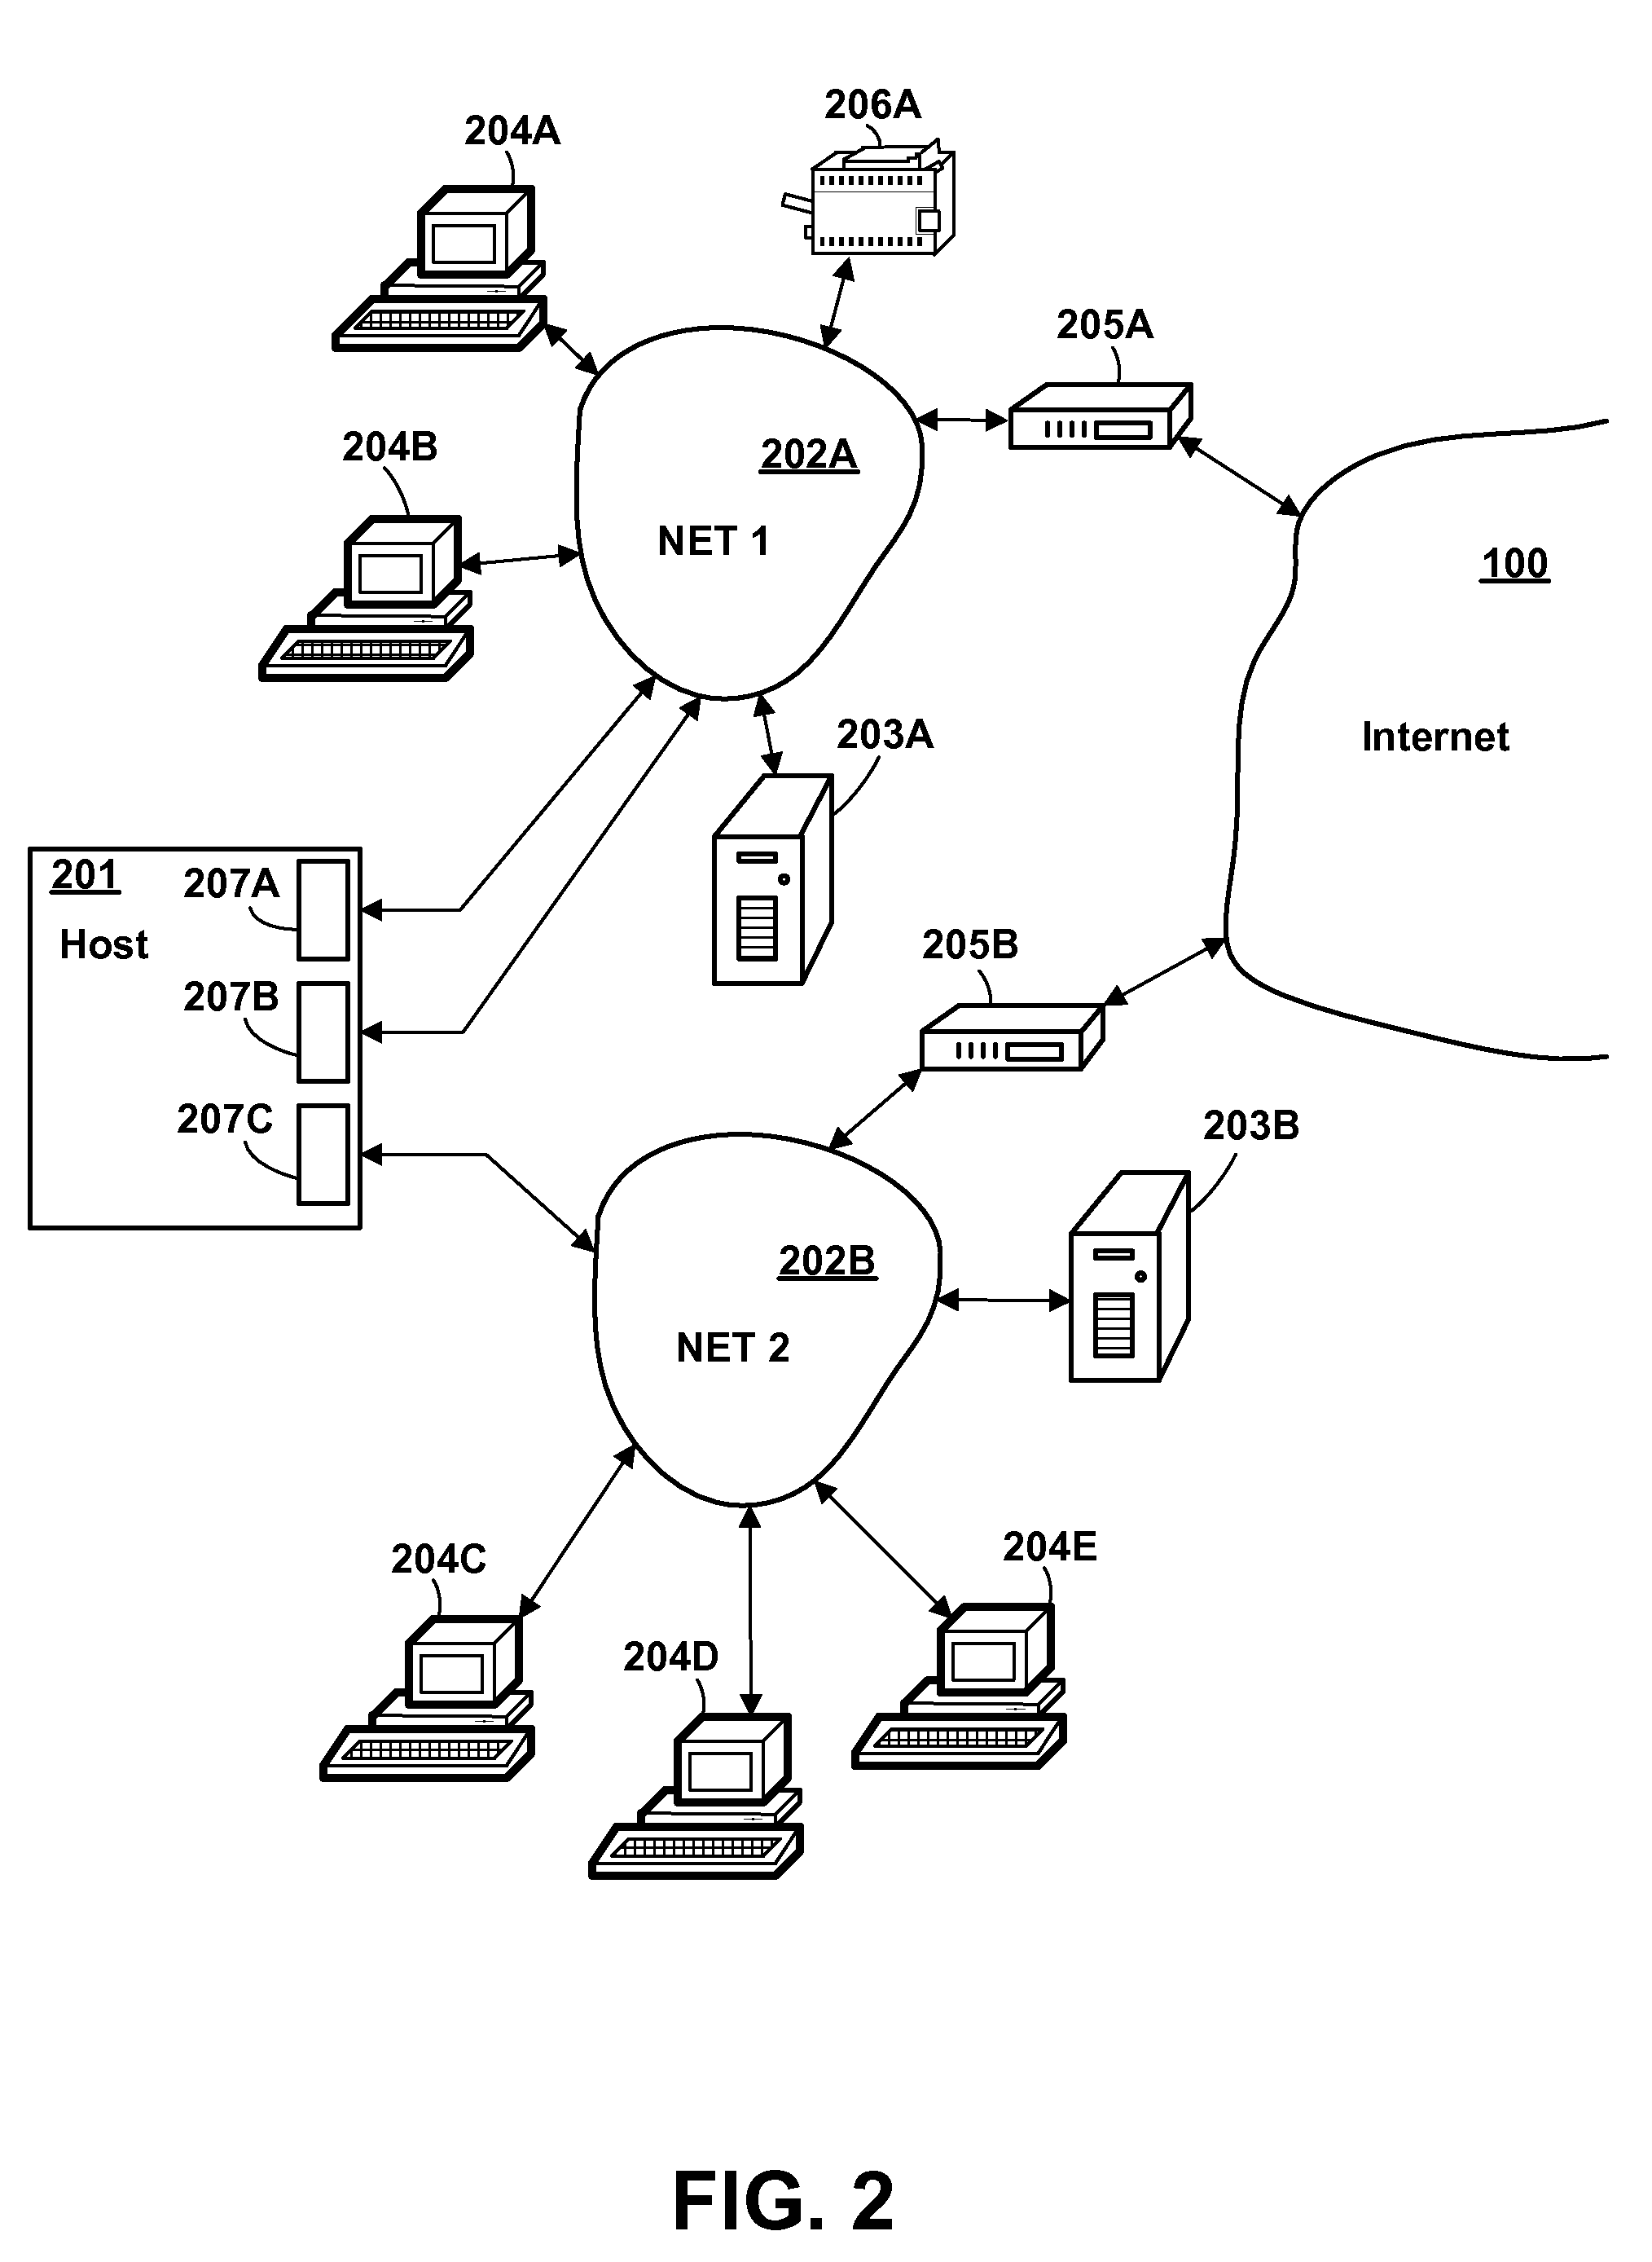 Method and Apparatus for Dynamically Configuring Virtual Internet Protocol Addresses